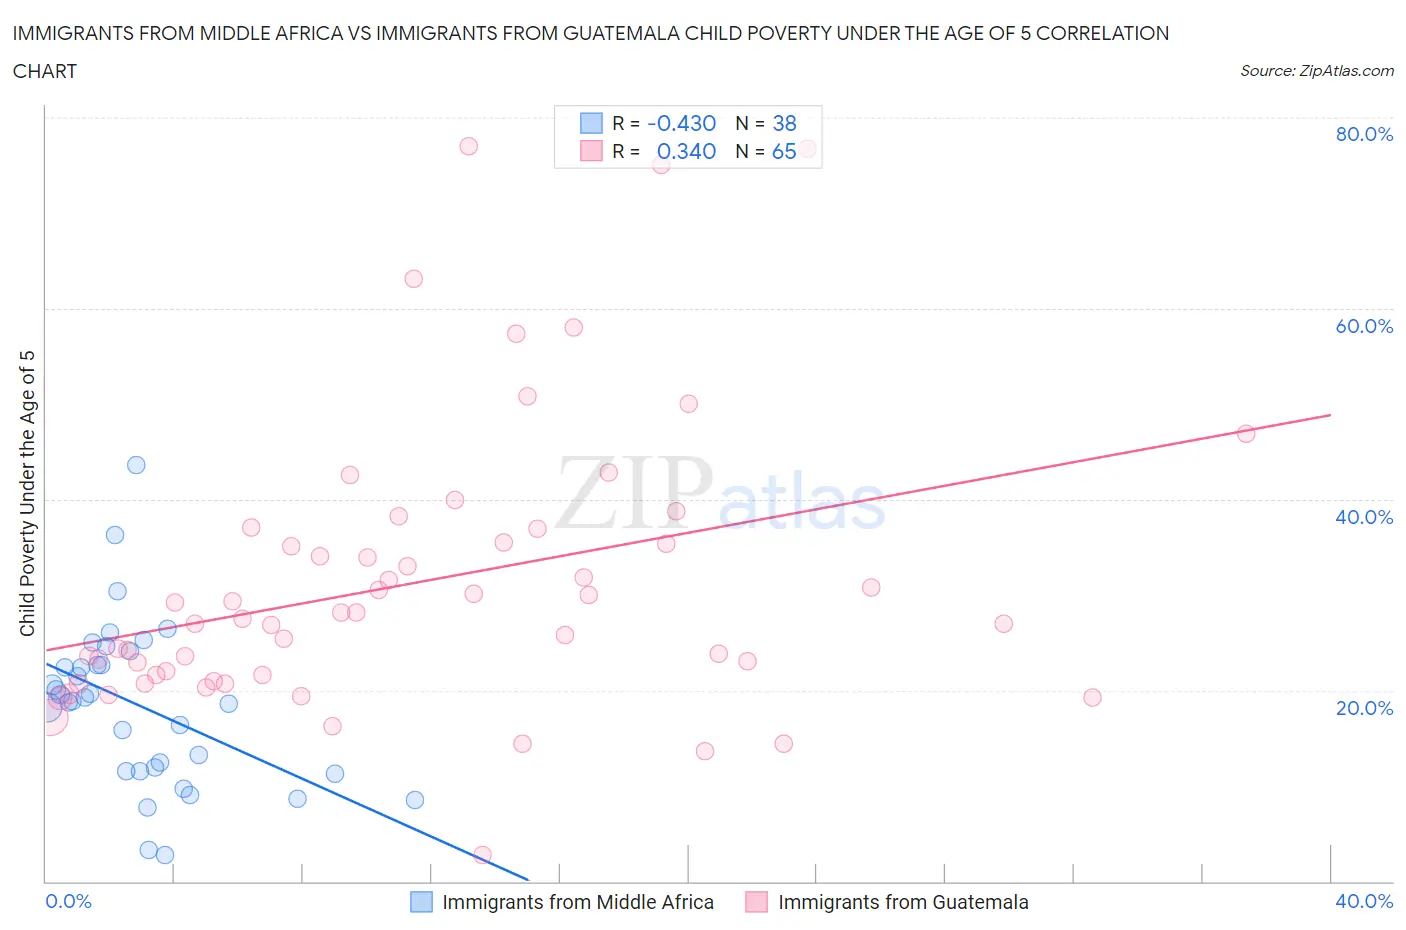 Immigrants from Middle Africa vs Immigrants from Guatemala Child Poverty Under the Age of 5